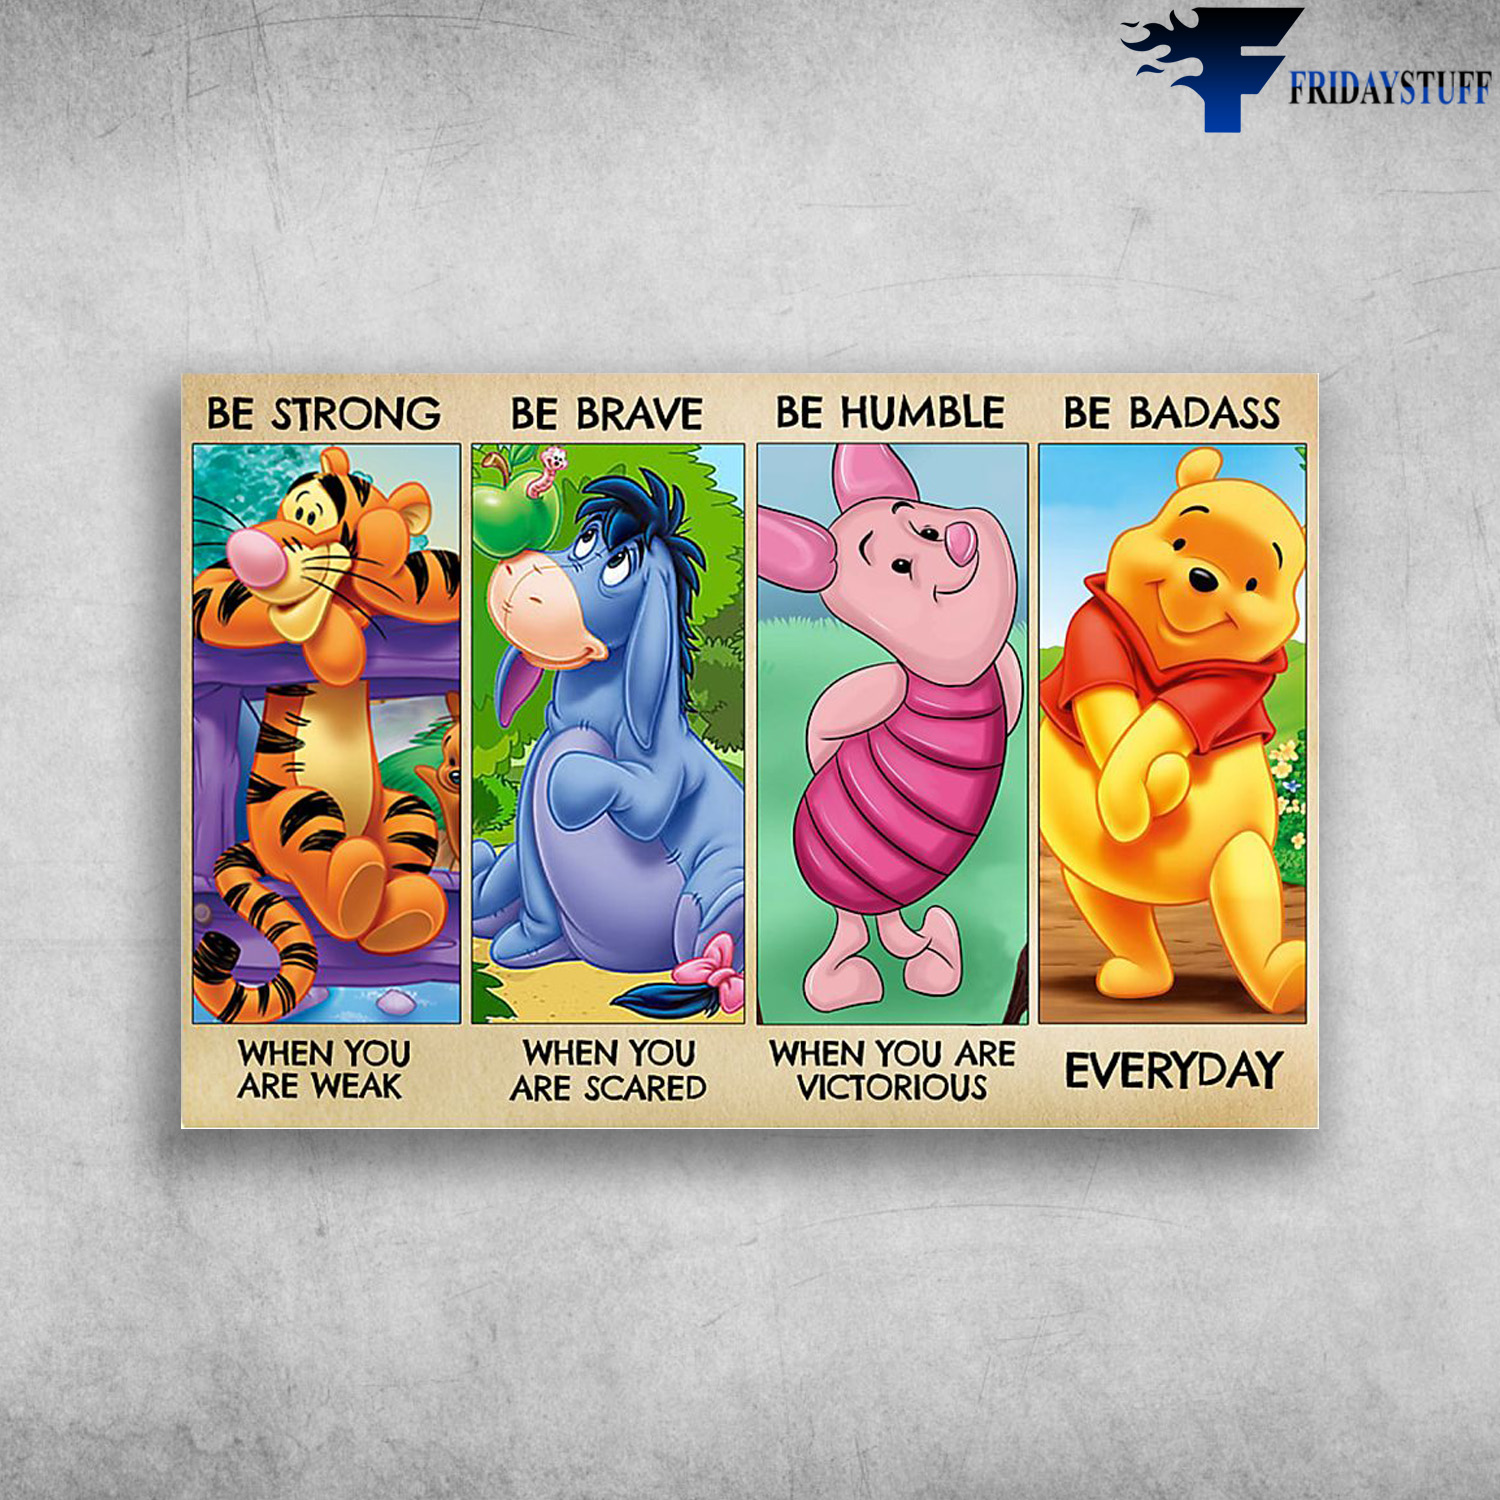 Winnie-the-Pooh Cartoon With Eeyore, Tigger, Piglet - Be Strong When You Are Weak, Be Brave When You Are Scared, Be Humble When You Are Victorious, Be Badass Everyday